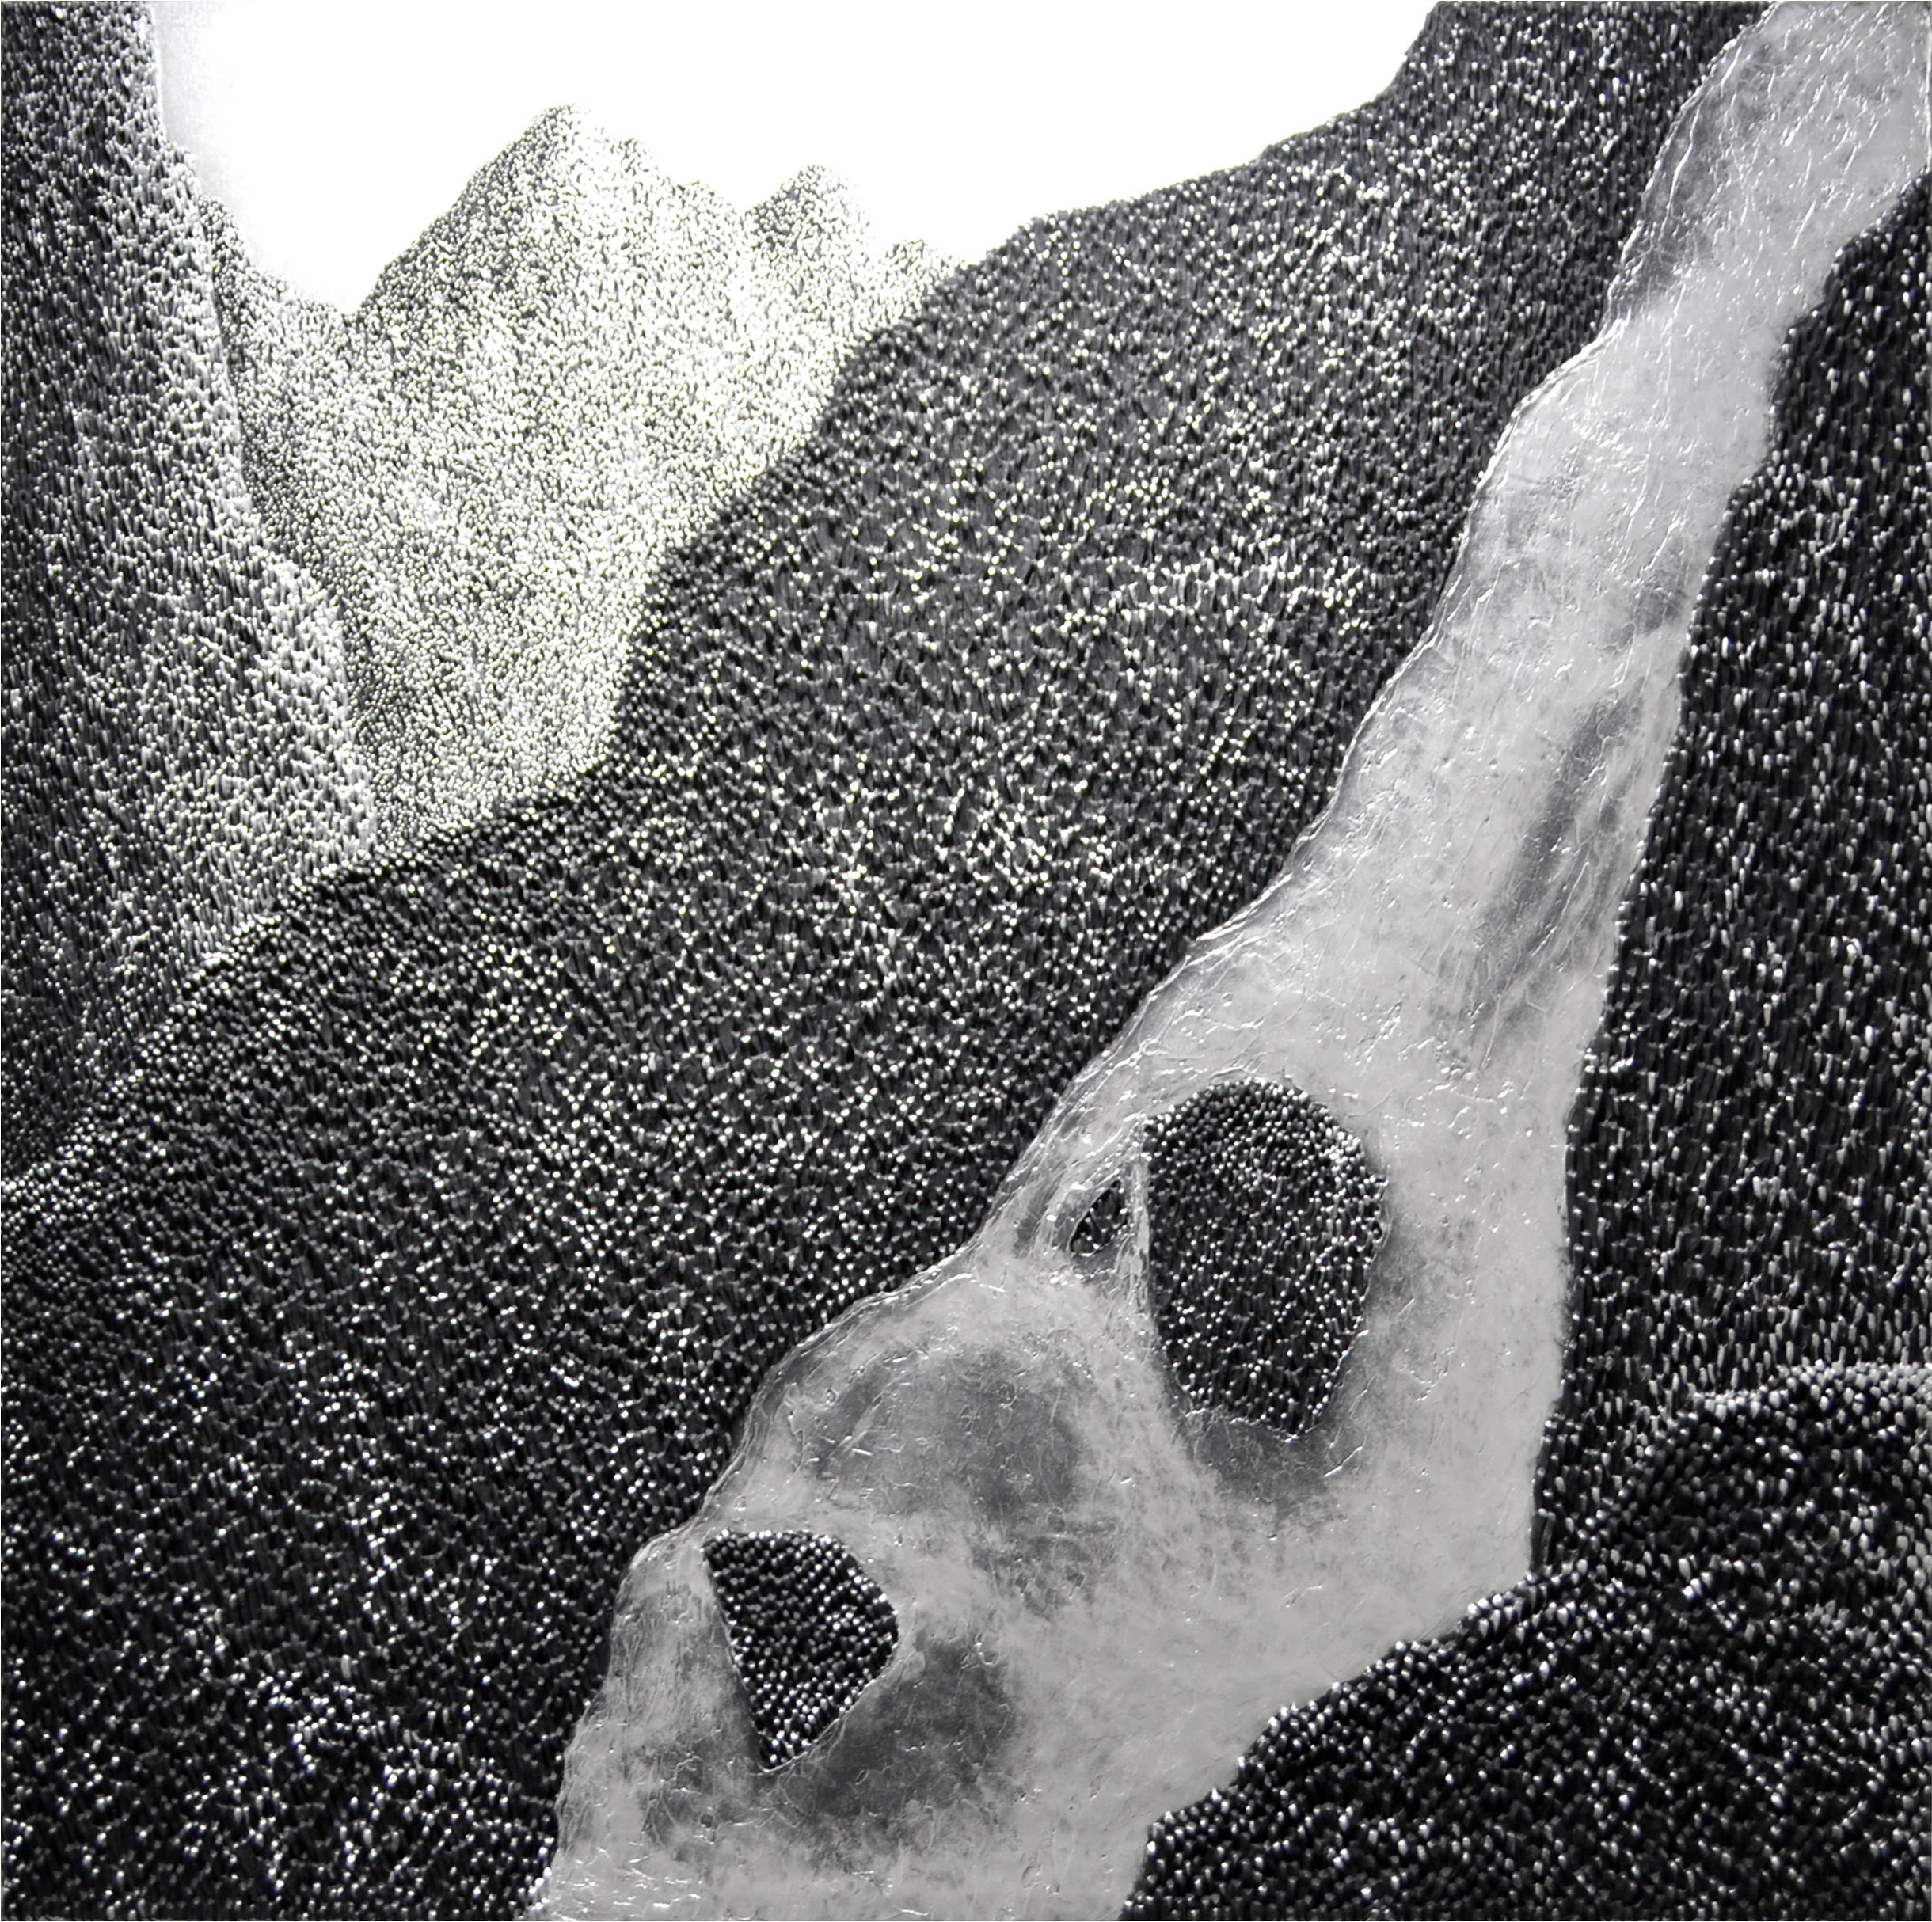 Saenkom Chansrinual Landscape Painting - "Grand Mountain - Waterfall", Silver Impasto Painting, Solid acrylic on canvas